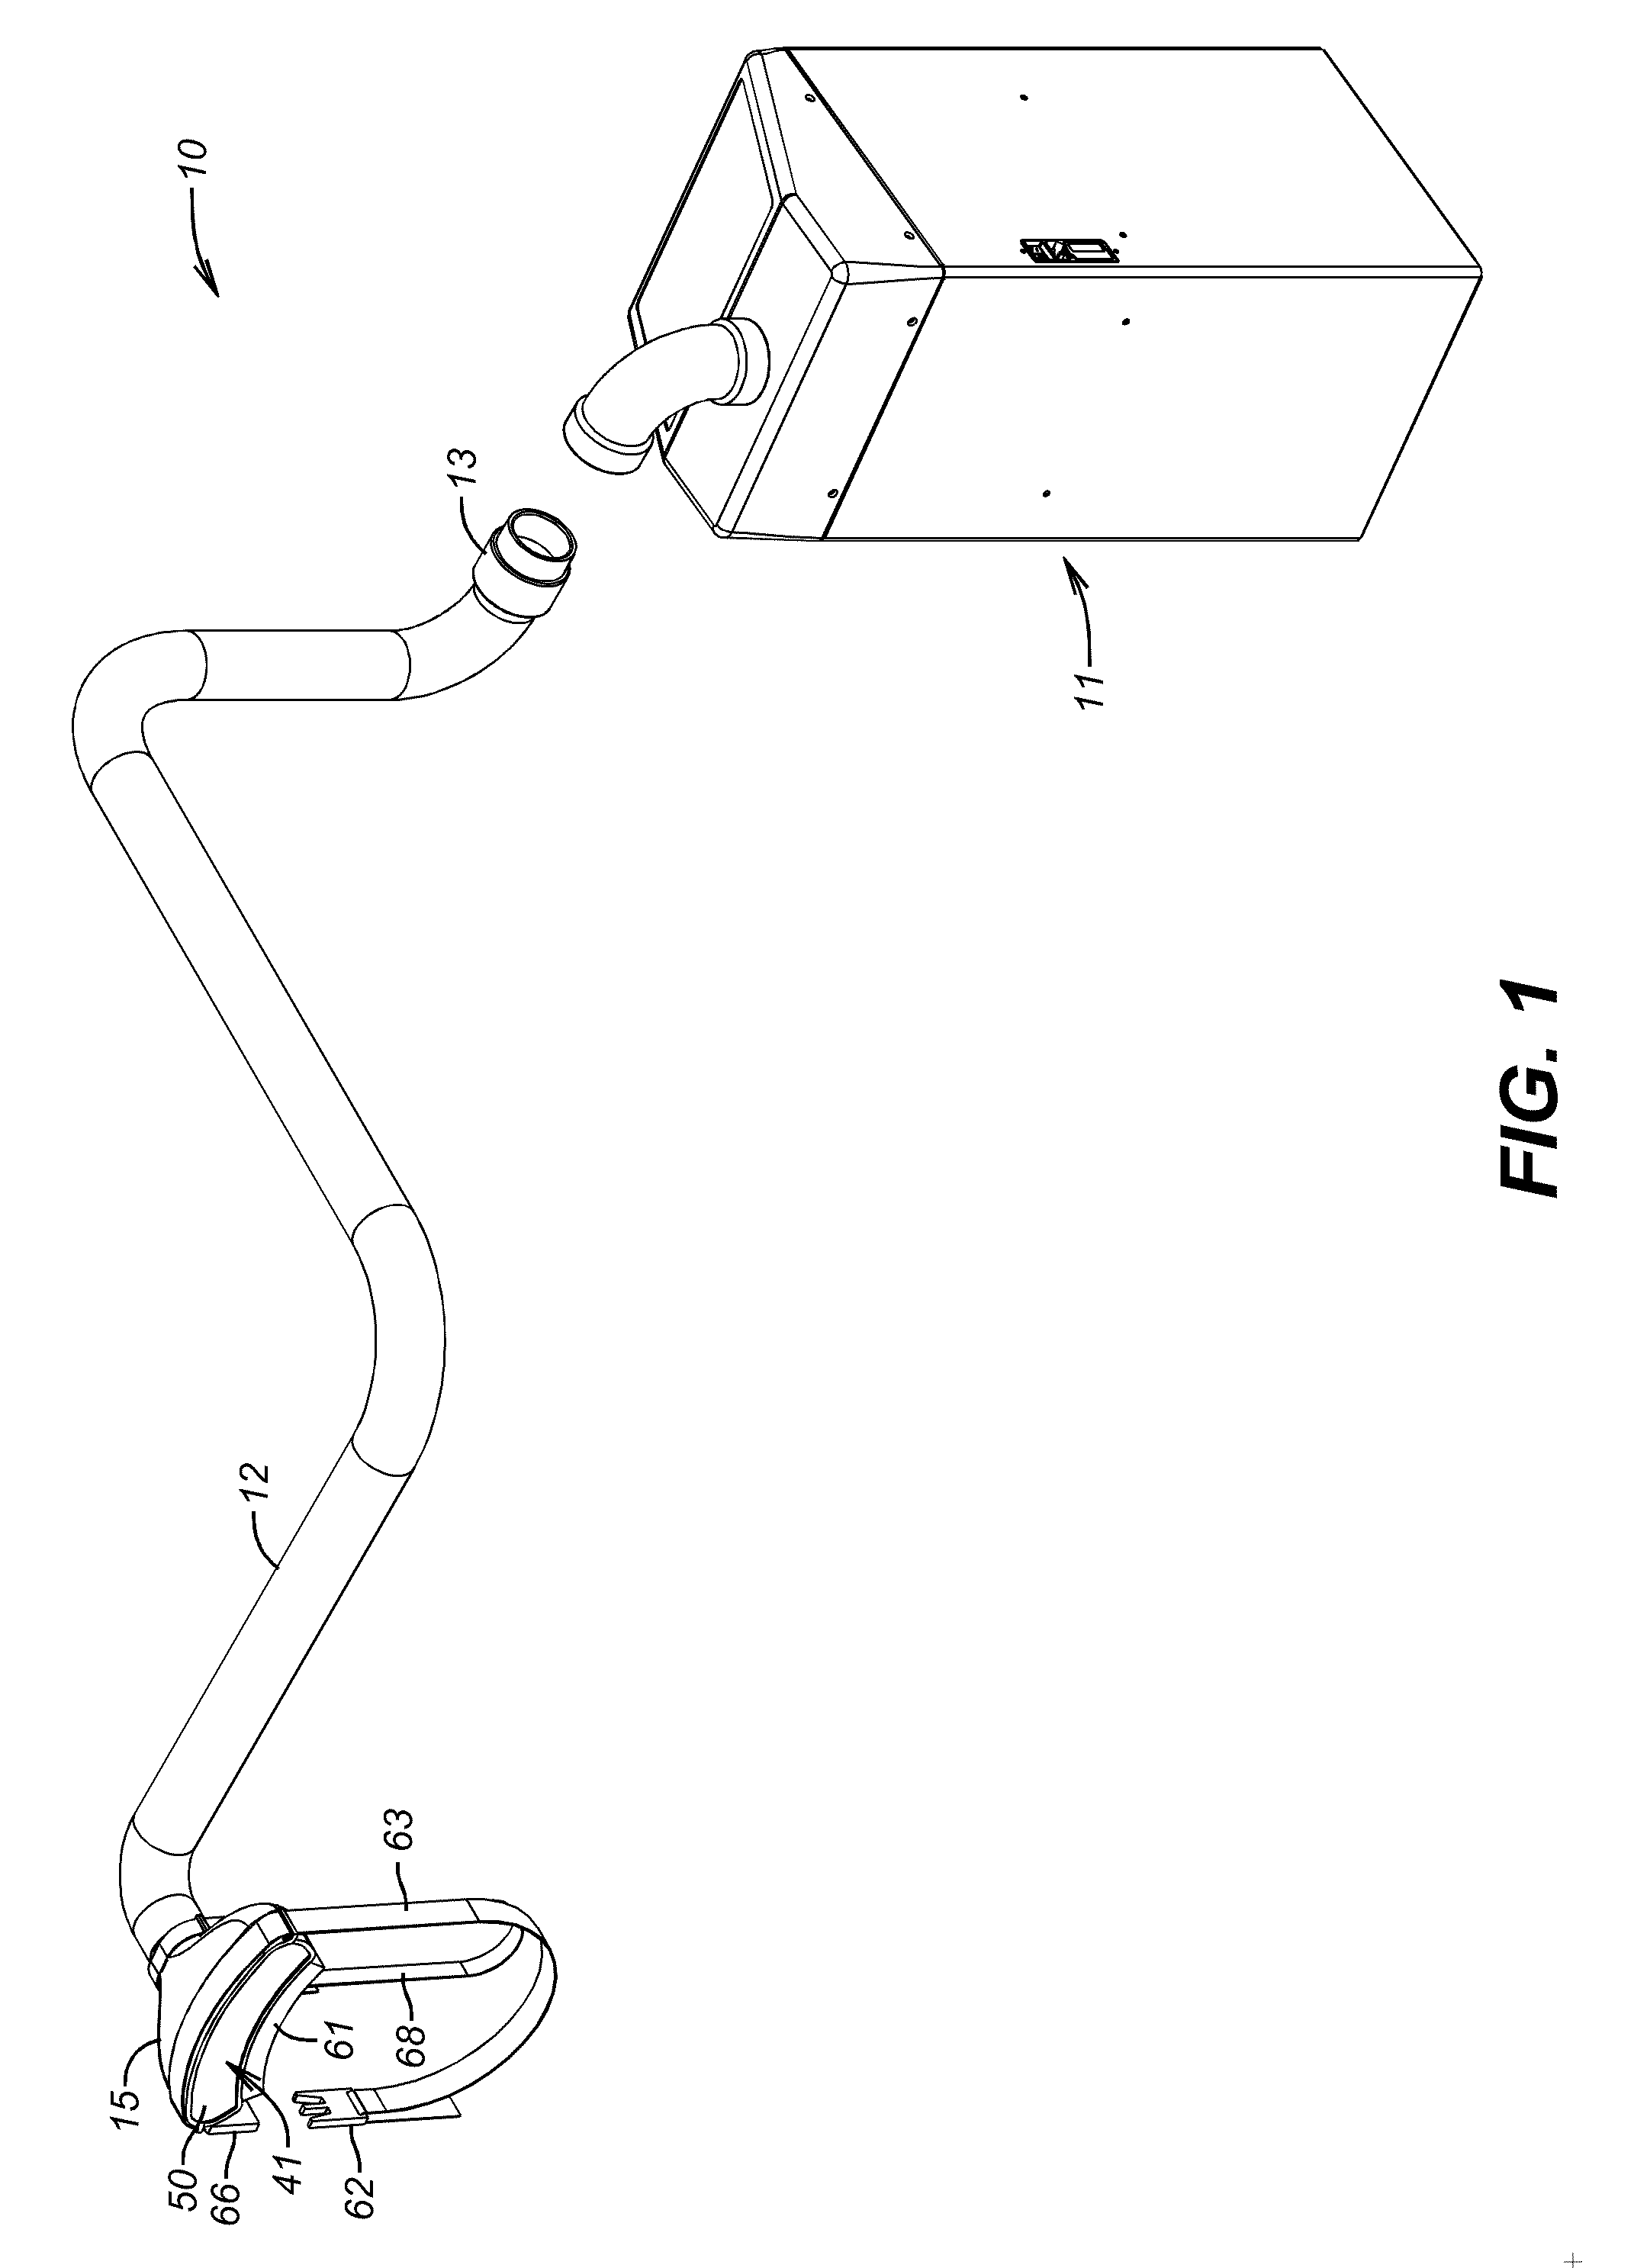 Apparatus and Method for Reducing Contamination of Surgical Sites